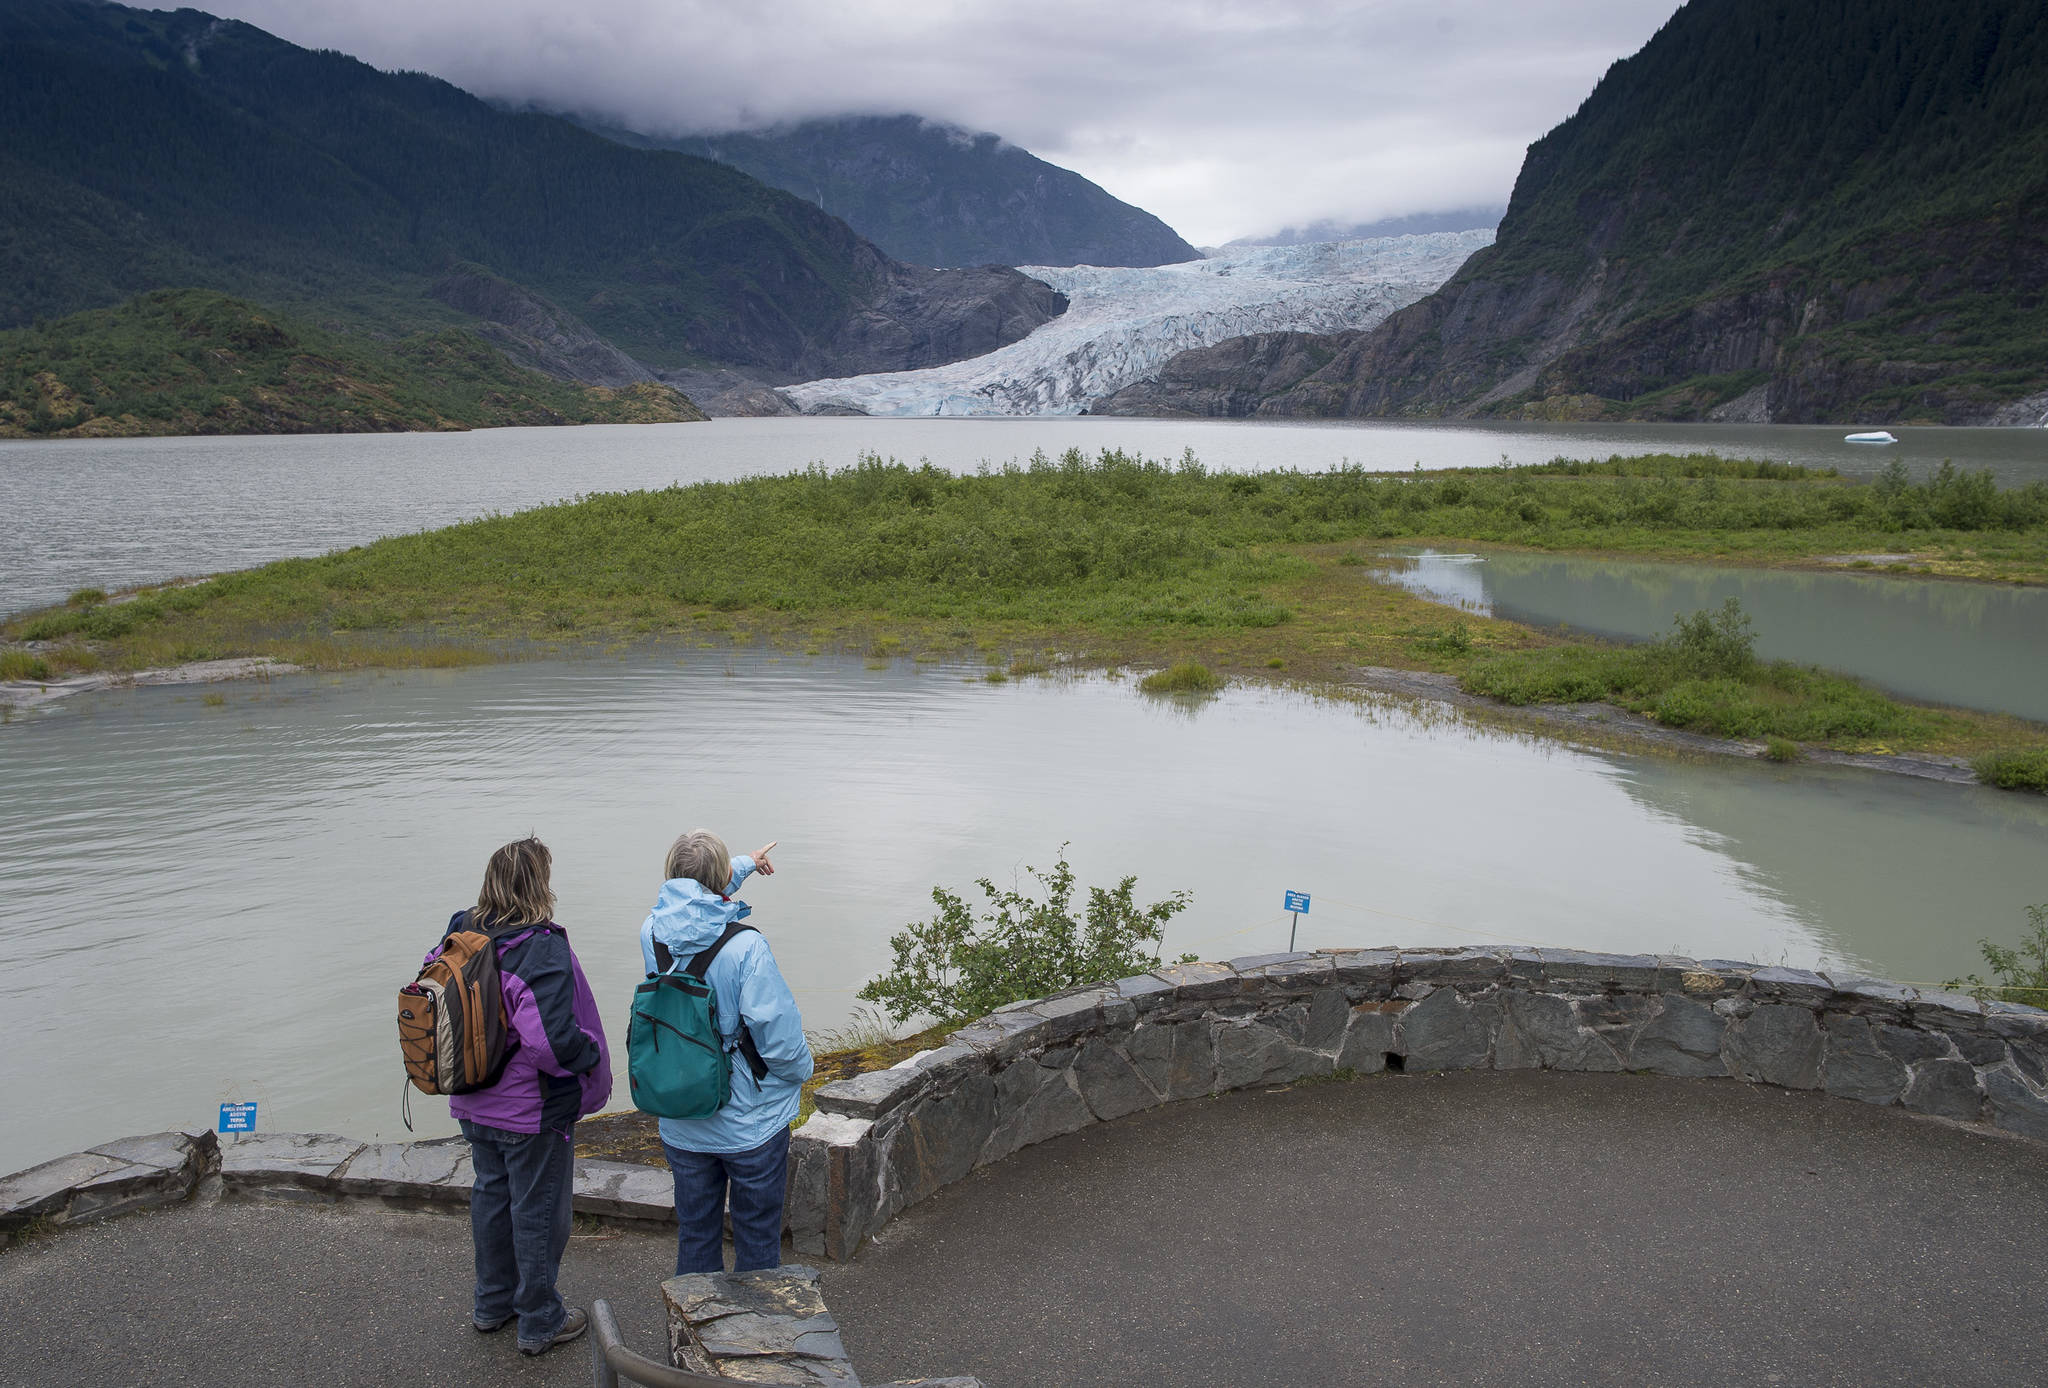 The Mendenhall Glacier as viewed from the Mendenhall Glacier Visitor Center on Wednesday, July 18, 2018. The National Weather Service has issued a flood watch saying Suicide Basin is now draining into Mendenhall Lake with potential flooding to begin by late Thursday afternoon. (Michael Penn | Juneau Empire)